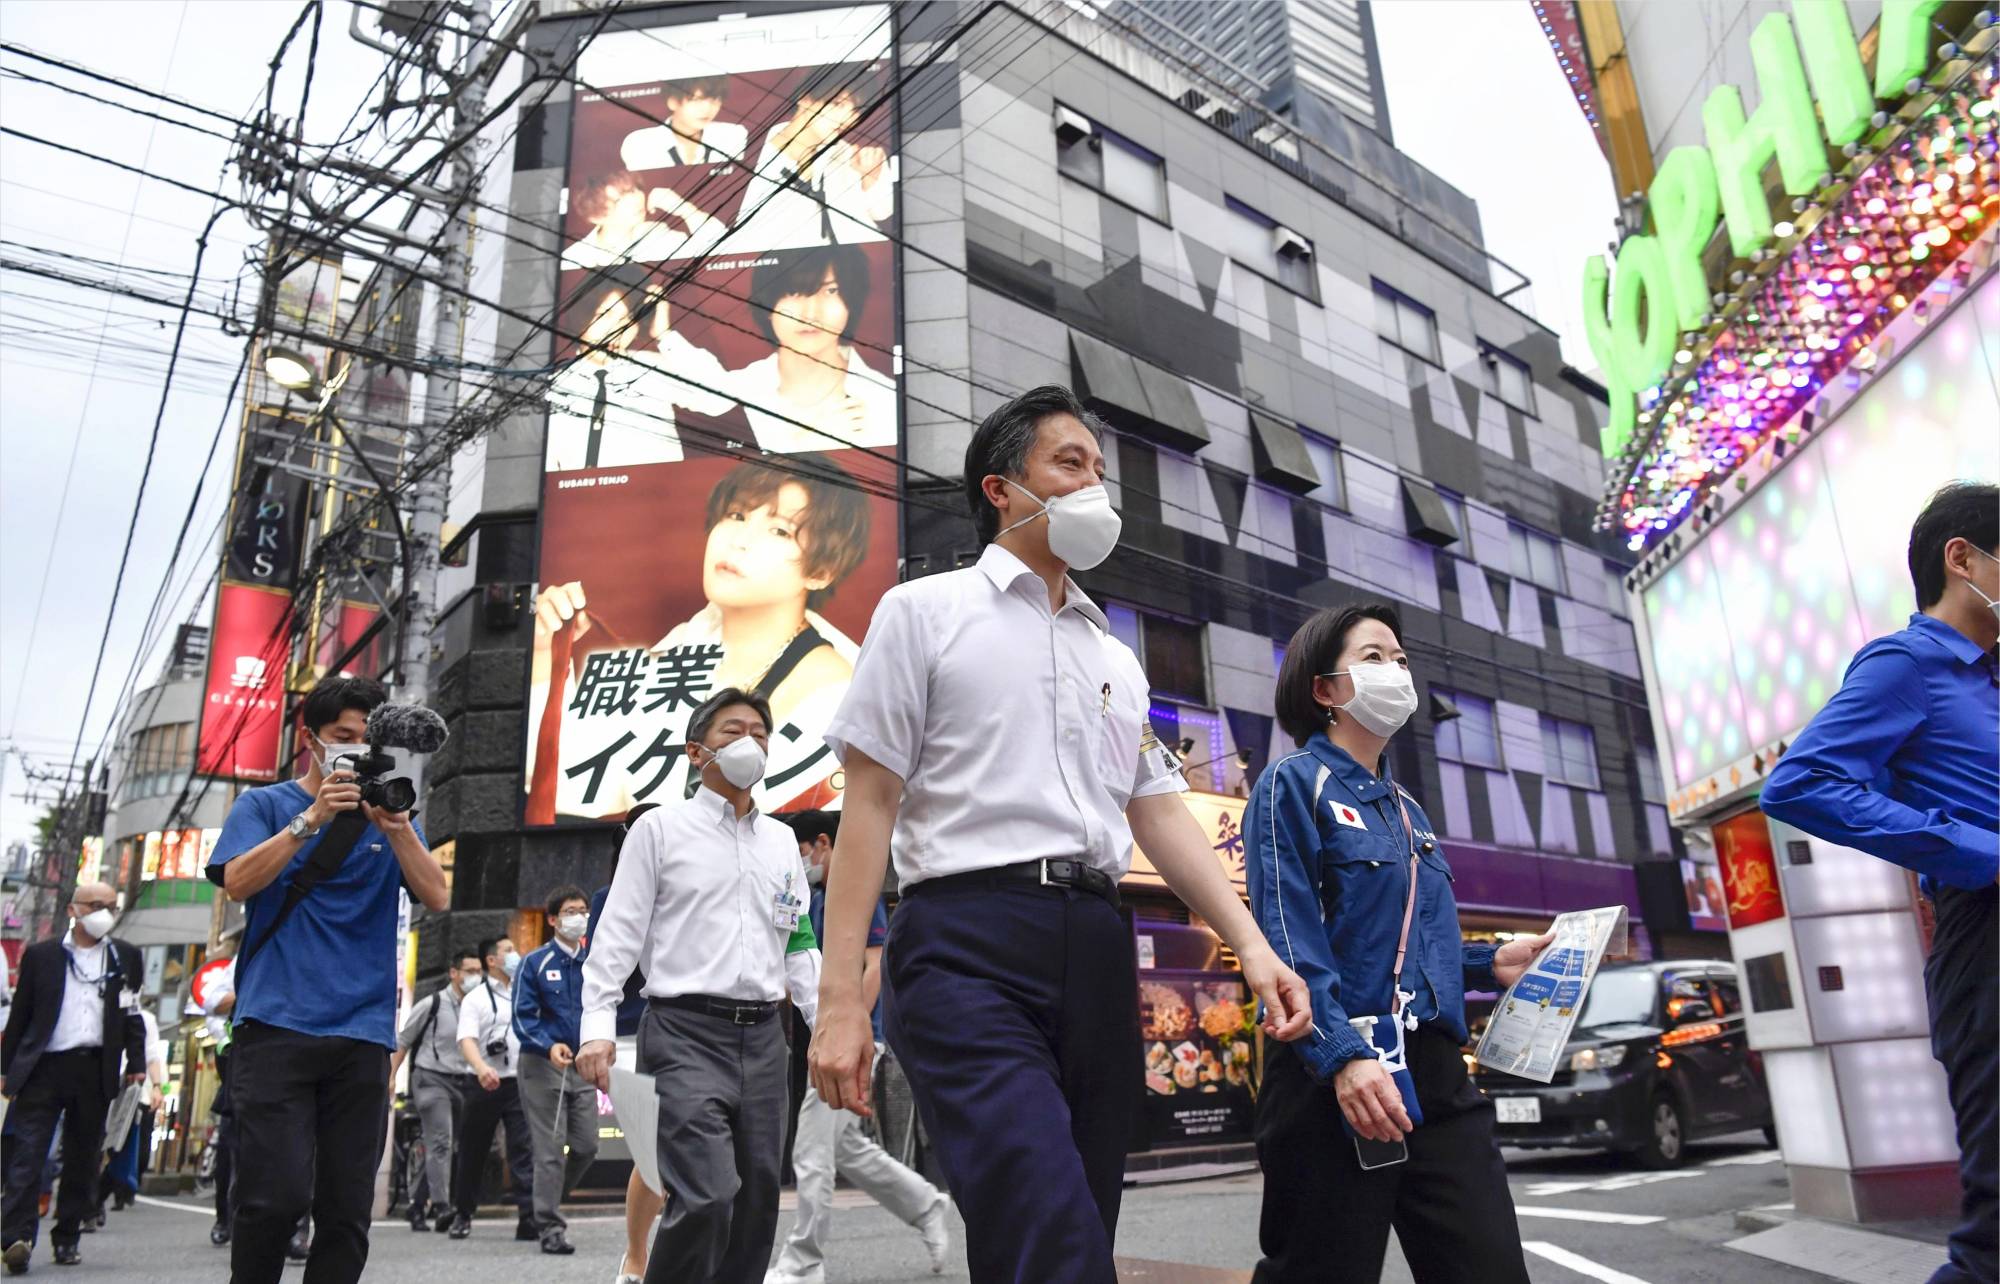 The head of Shinjuku ward, Yoshizumi Kenichi (center), asks for cooperation with measures against the pandemic in the Kabukicho district on Monday. | KYODO